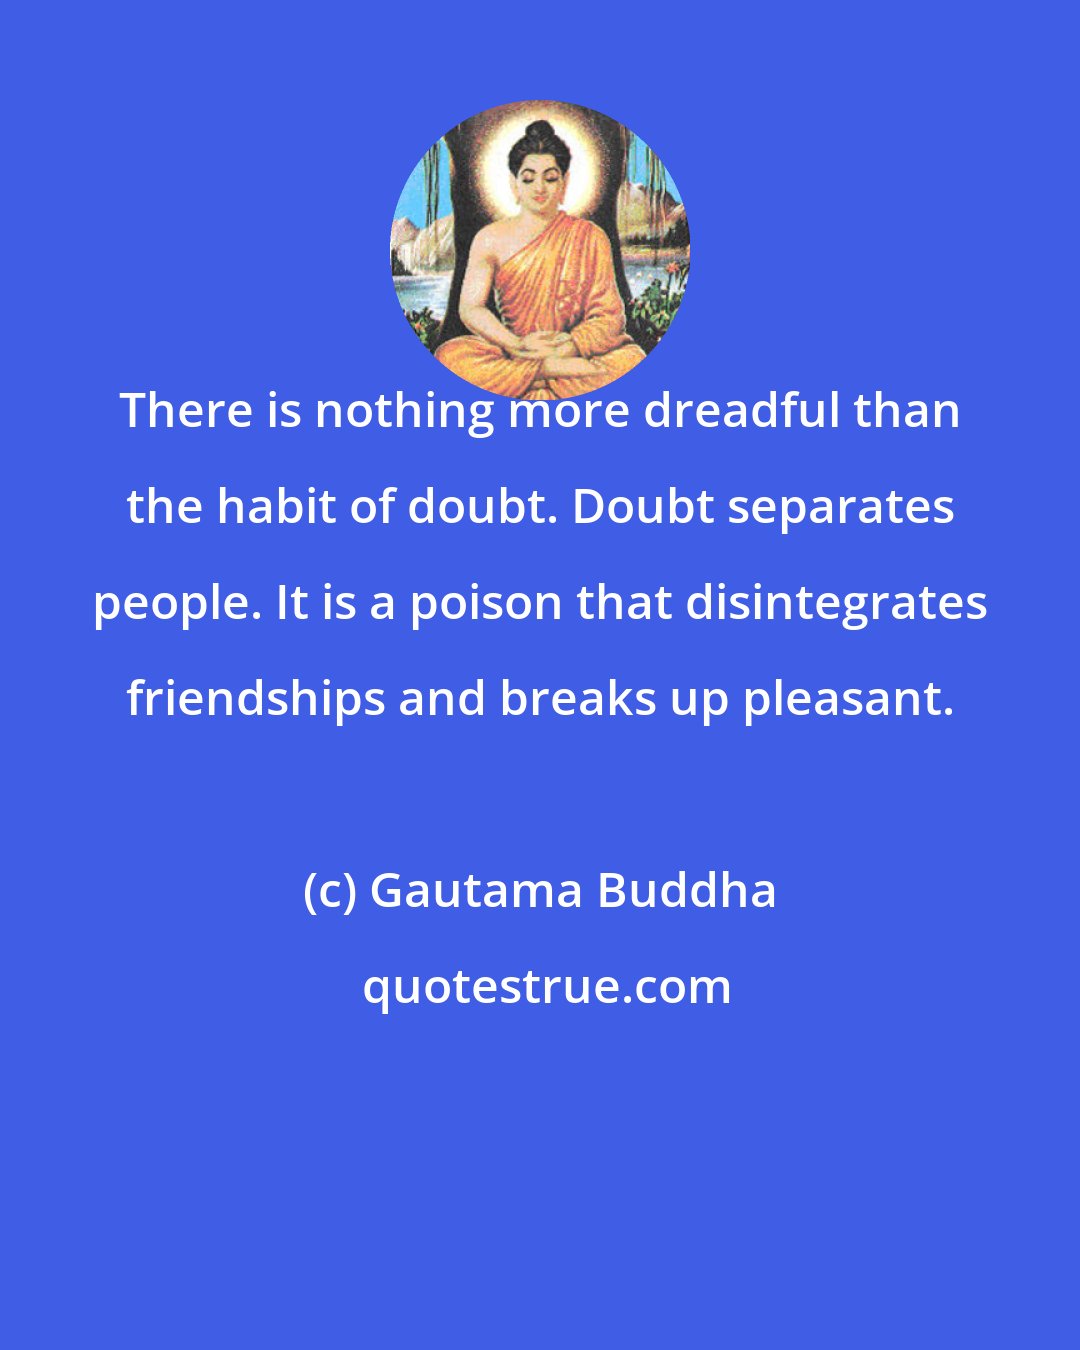 Gautama Buddha: There is nothing more dreadful than the habit of doubt. Doubt separates people. It is a poison that disintegrates friendships and breaks up pleasant.